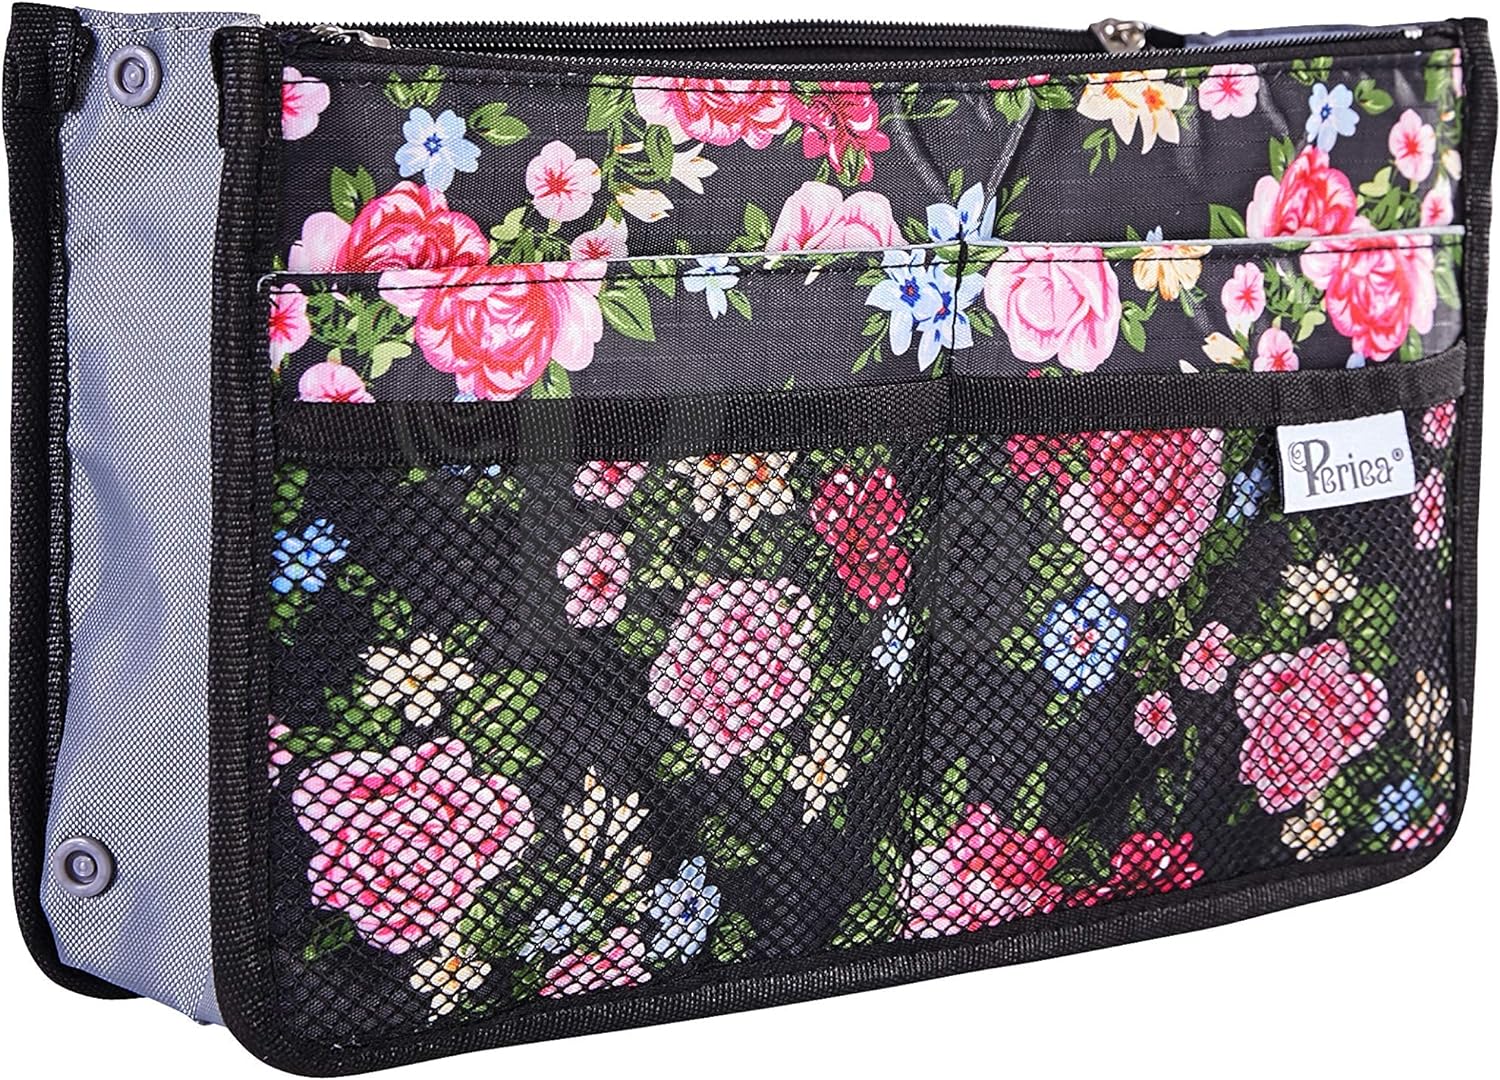 Periea Chelsy Purse Organizer Insert with Handles  13 Pockets - 3 Sizes (Black Floral, Small)